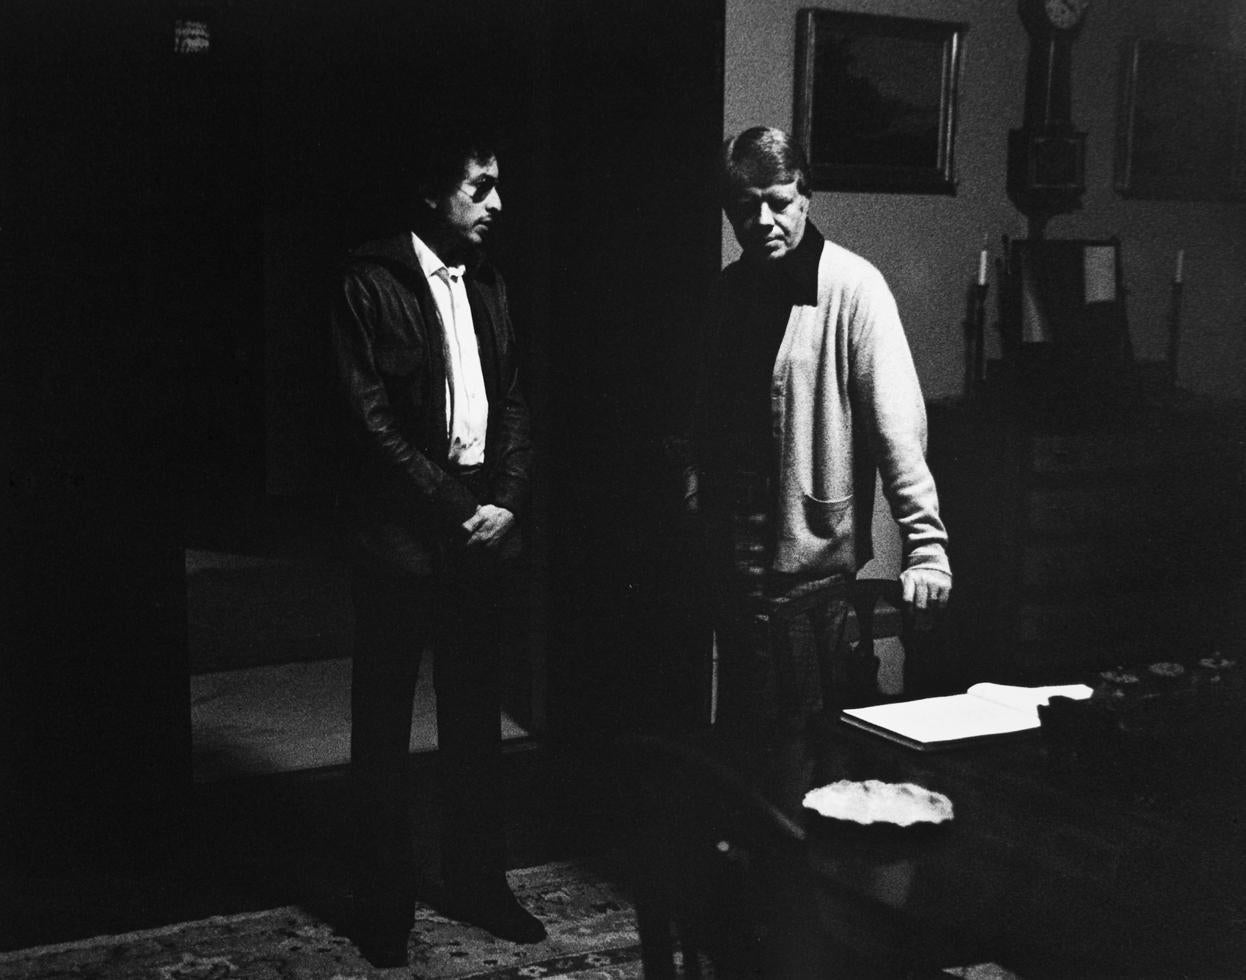 Barry Feinstein Black and White Photograph - Bob Dylan and Jimmy Carter, Atlanta, GA, 1974